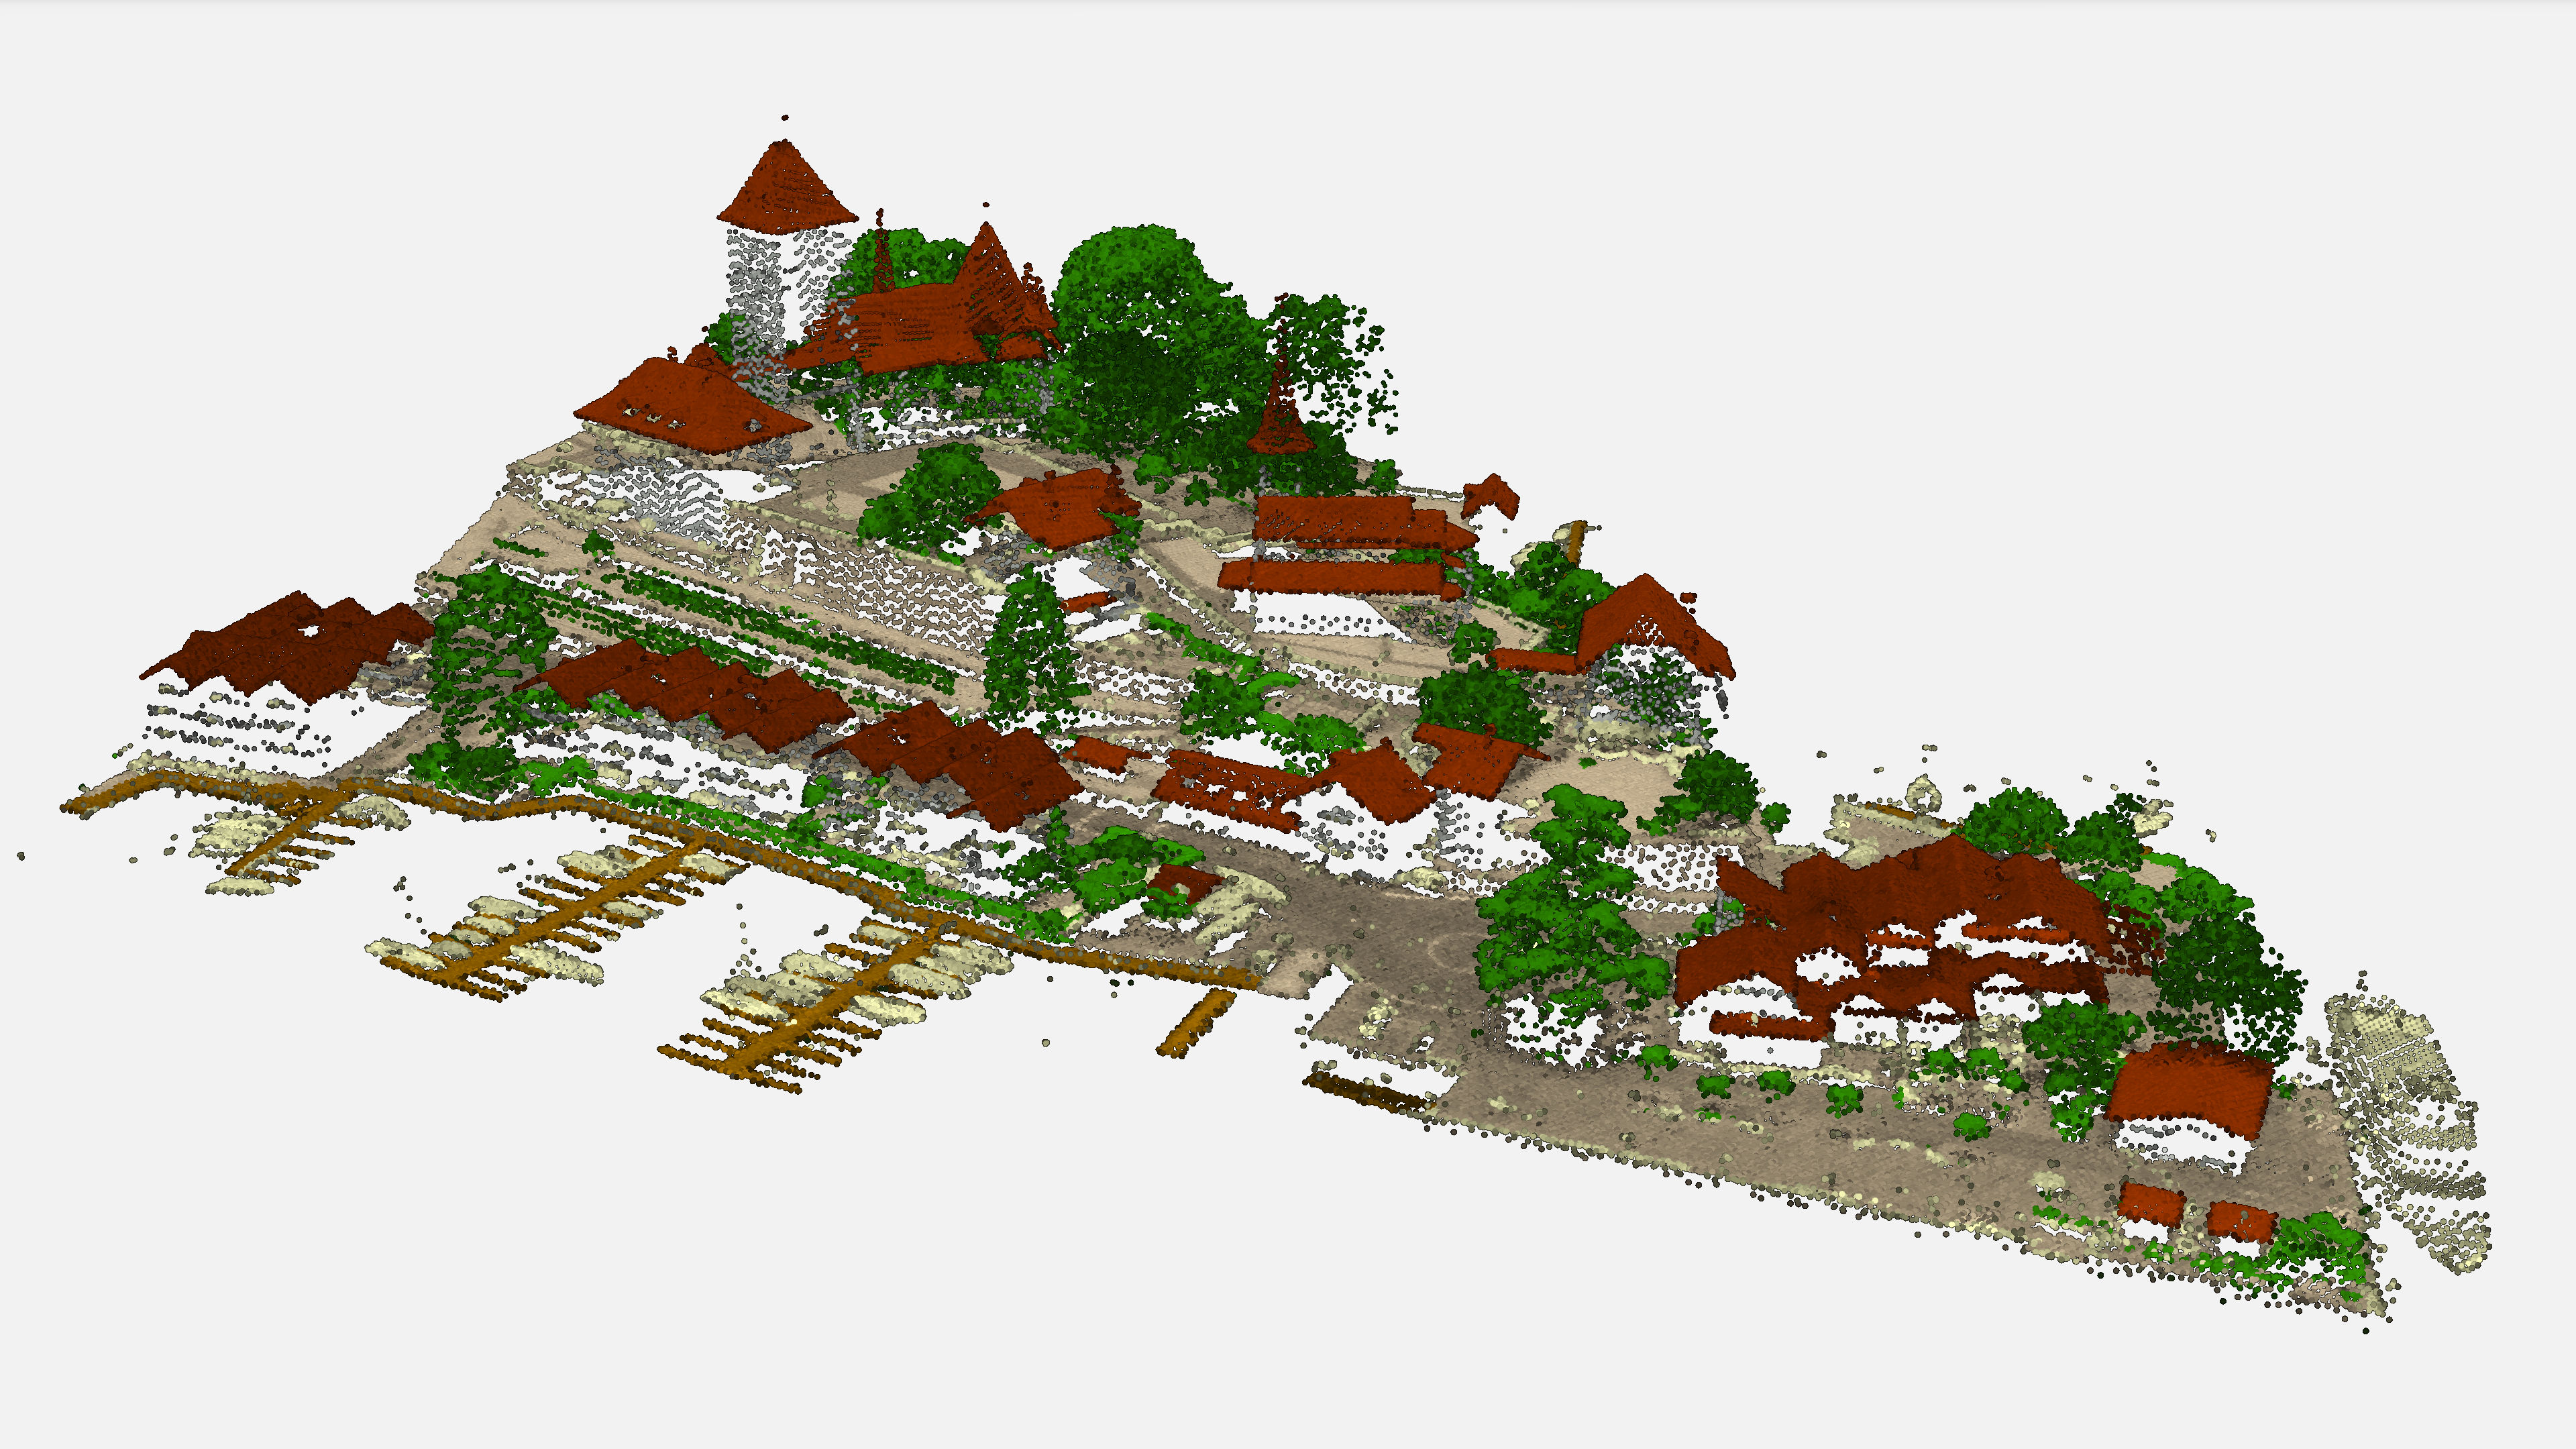 Spiez Castle and the nearby harbour are shown in the form of a LiDAR point cloud. Each LiDAR point is coloured according to its classification and the intensity of the signal. Thus it is possilbe to distinguish between the ground, building roofs, building facades, vegetation and mobile objects such as boats.